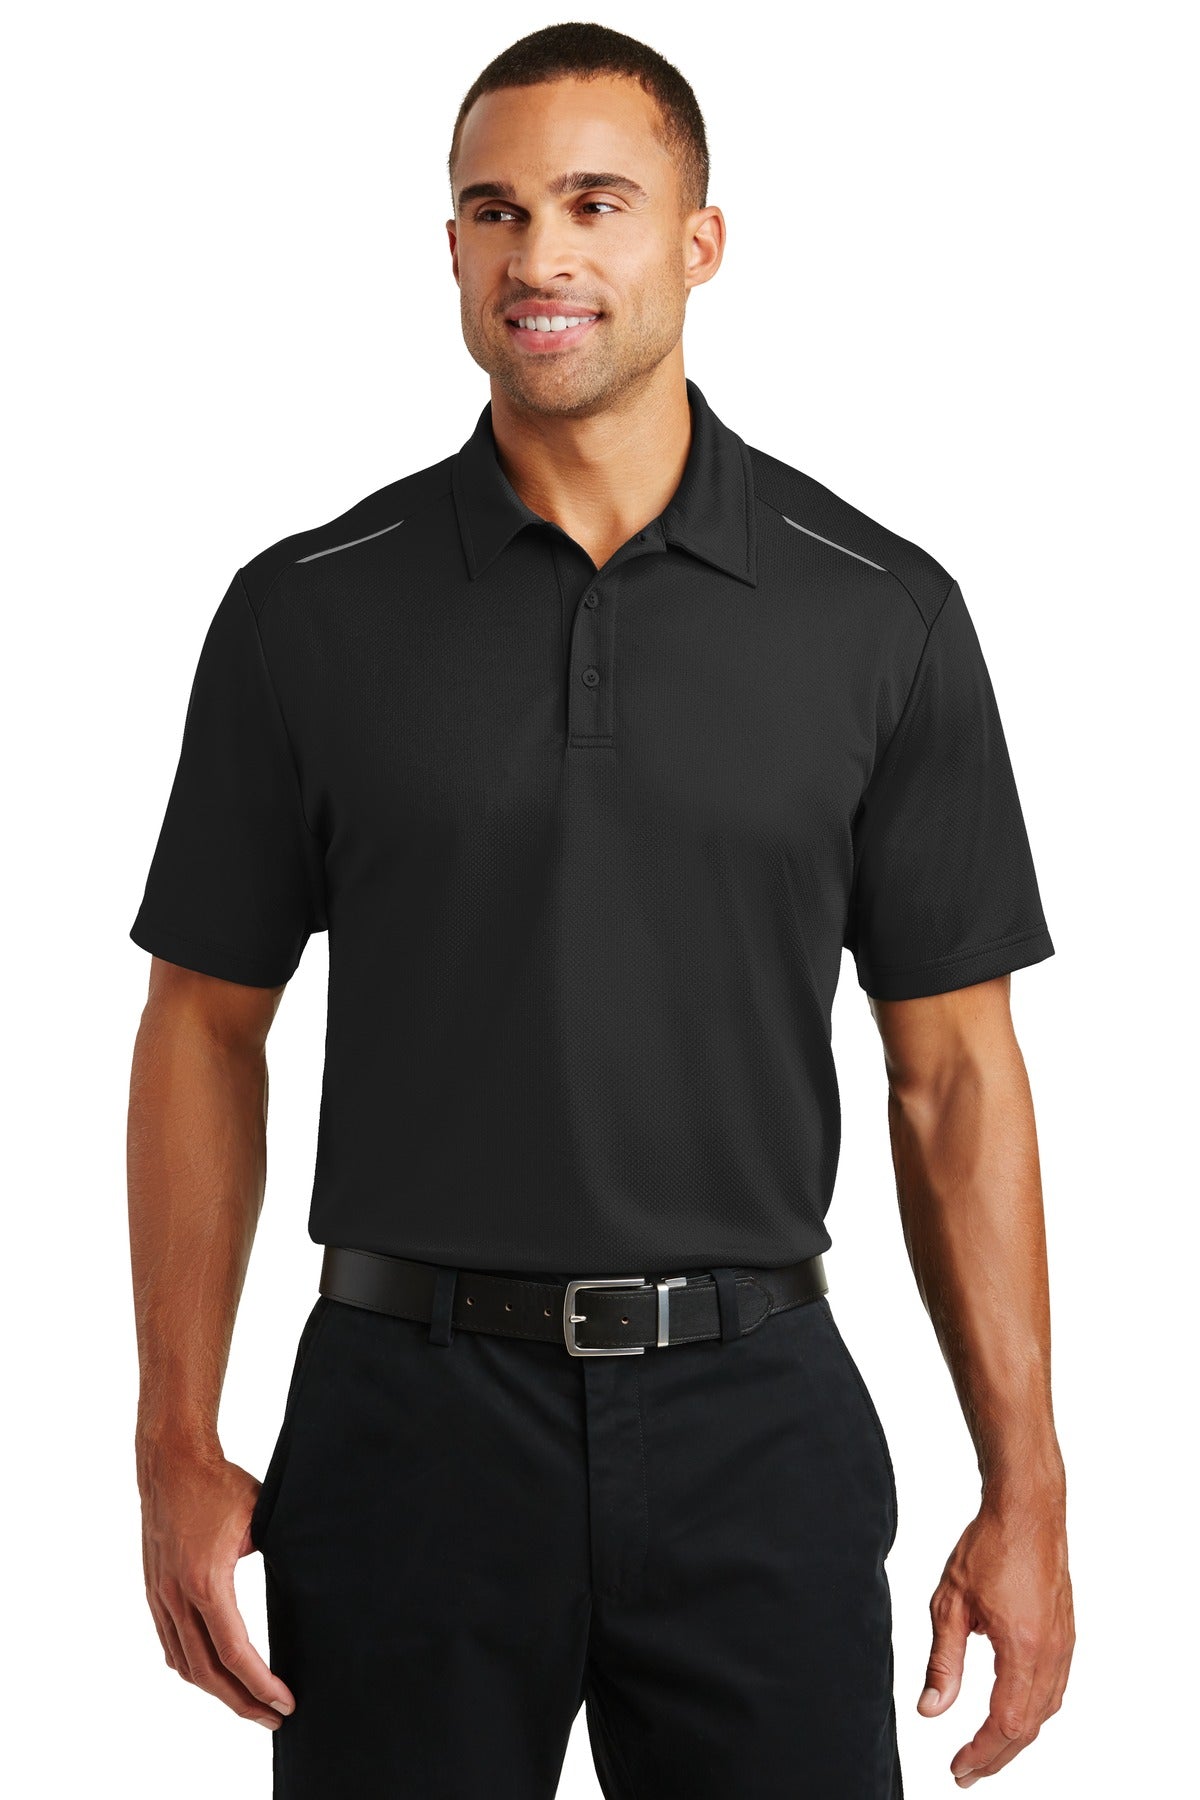 Port Authority Pinpoint Mesh Polo. K580